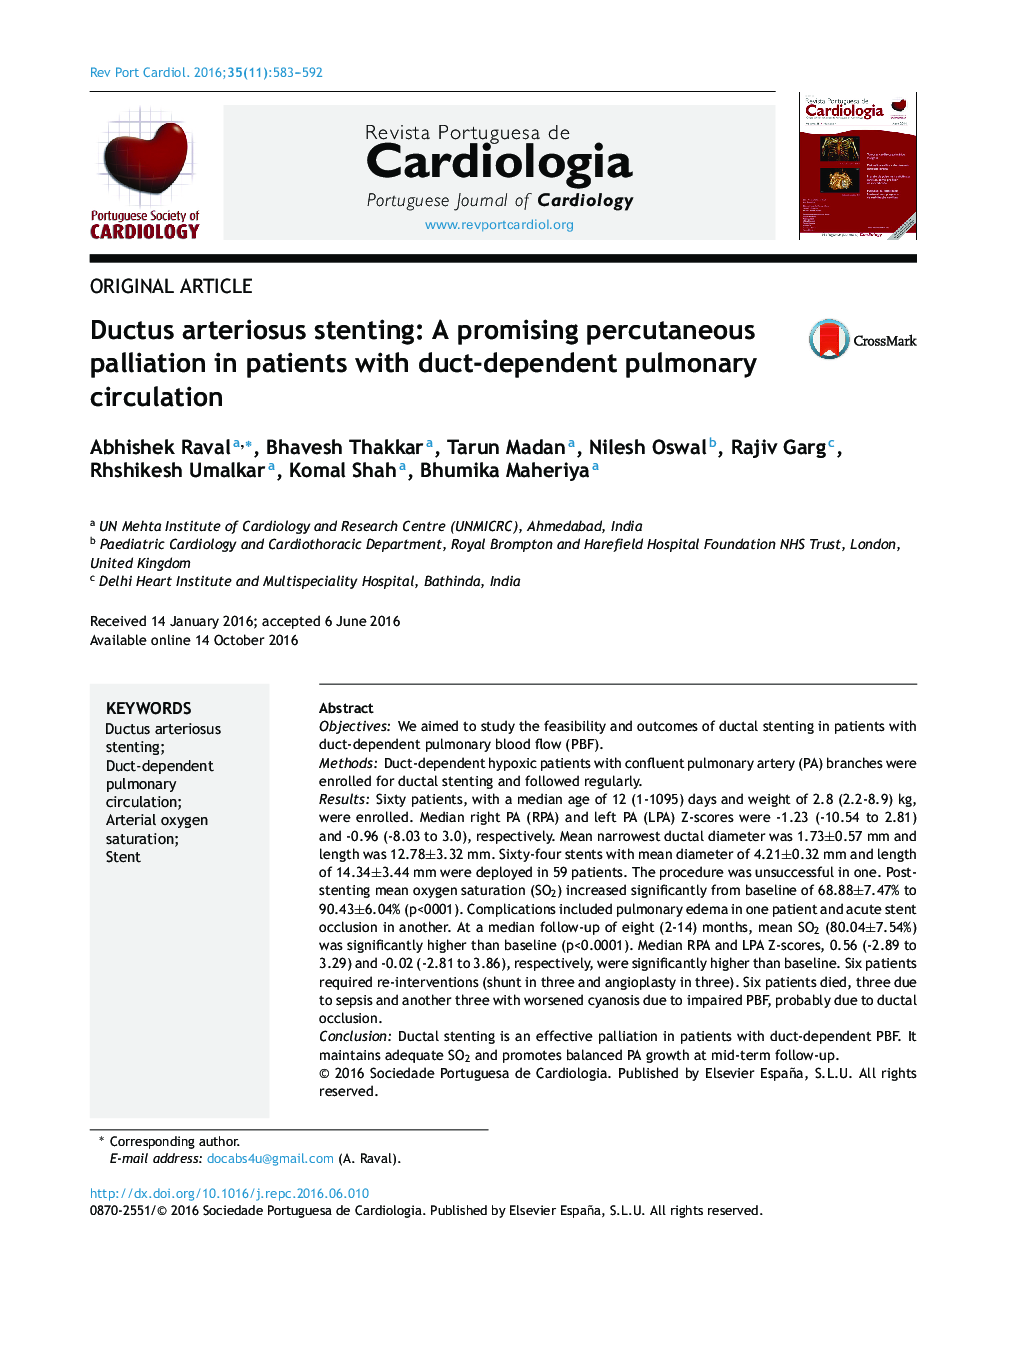 Ductus arteriosus stenting: A promising percutaneous palliation in patients with duct-dependent pulmonary circulation